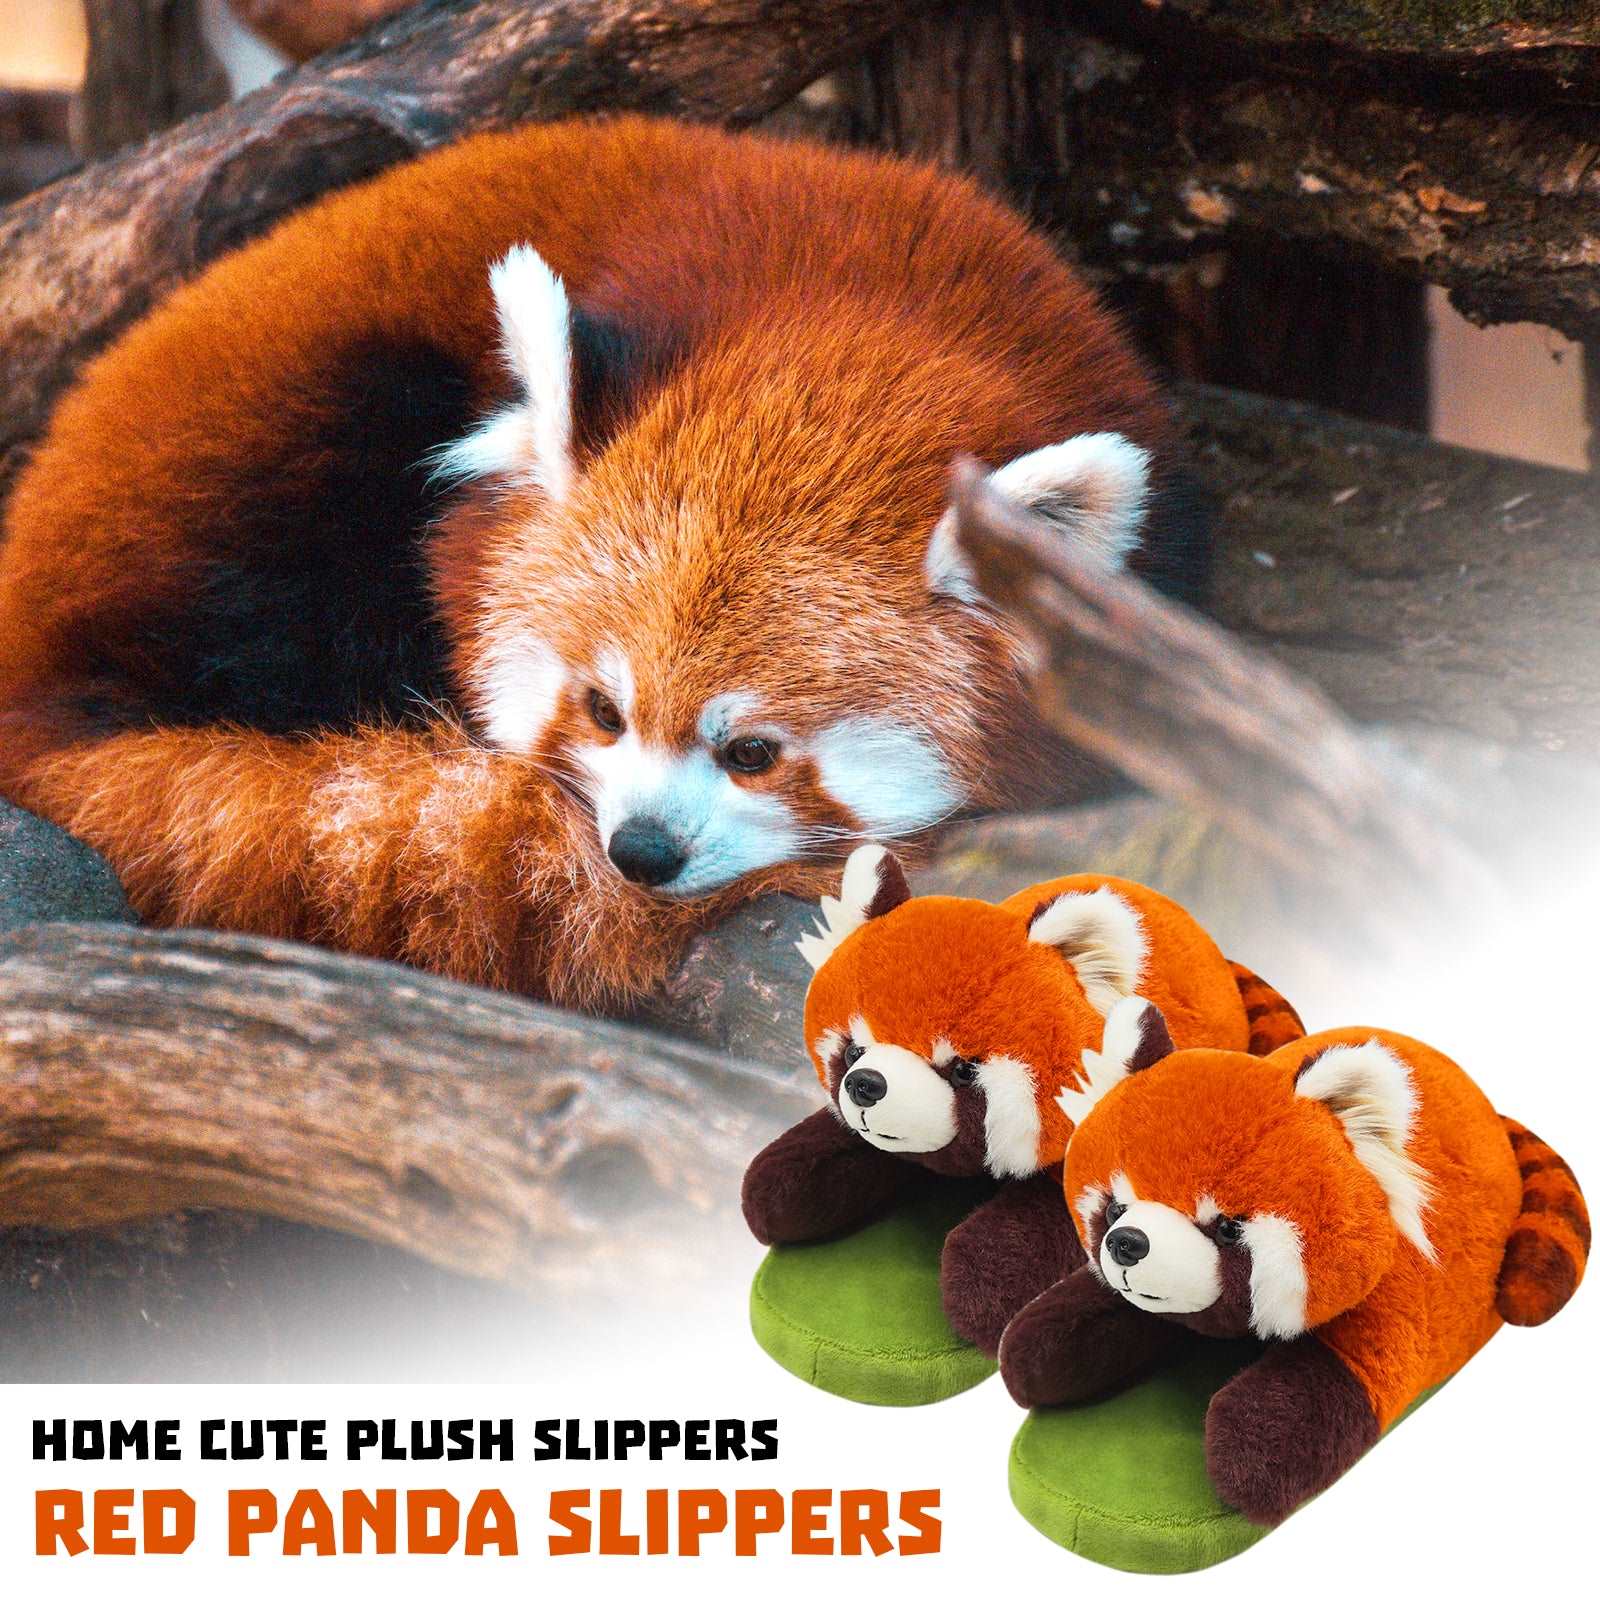 Red panda slippers that bring you closer to nature